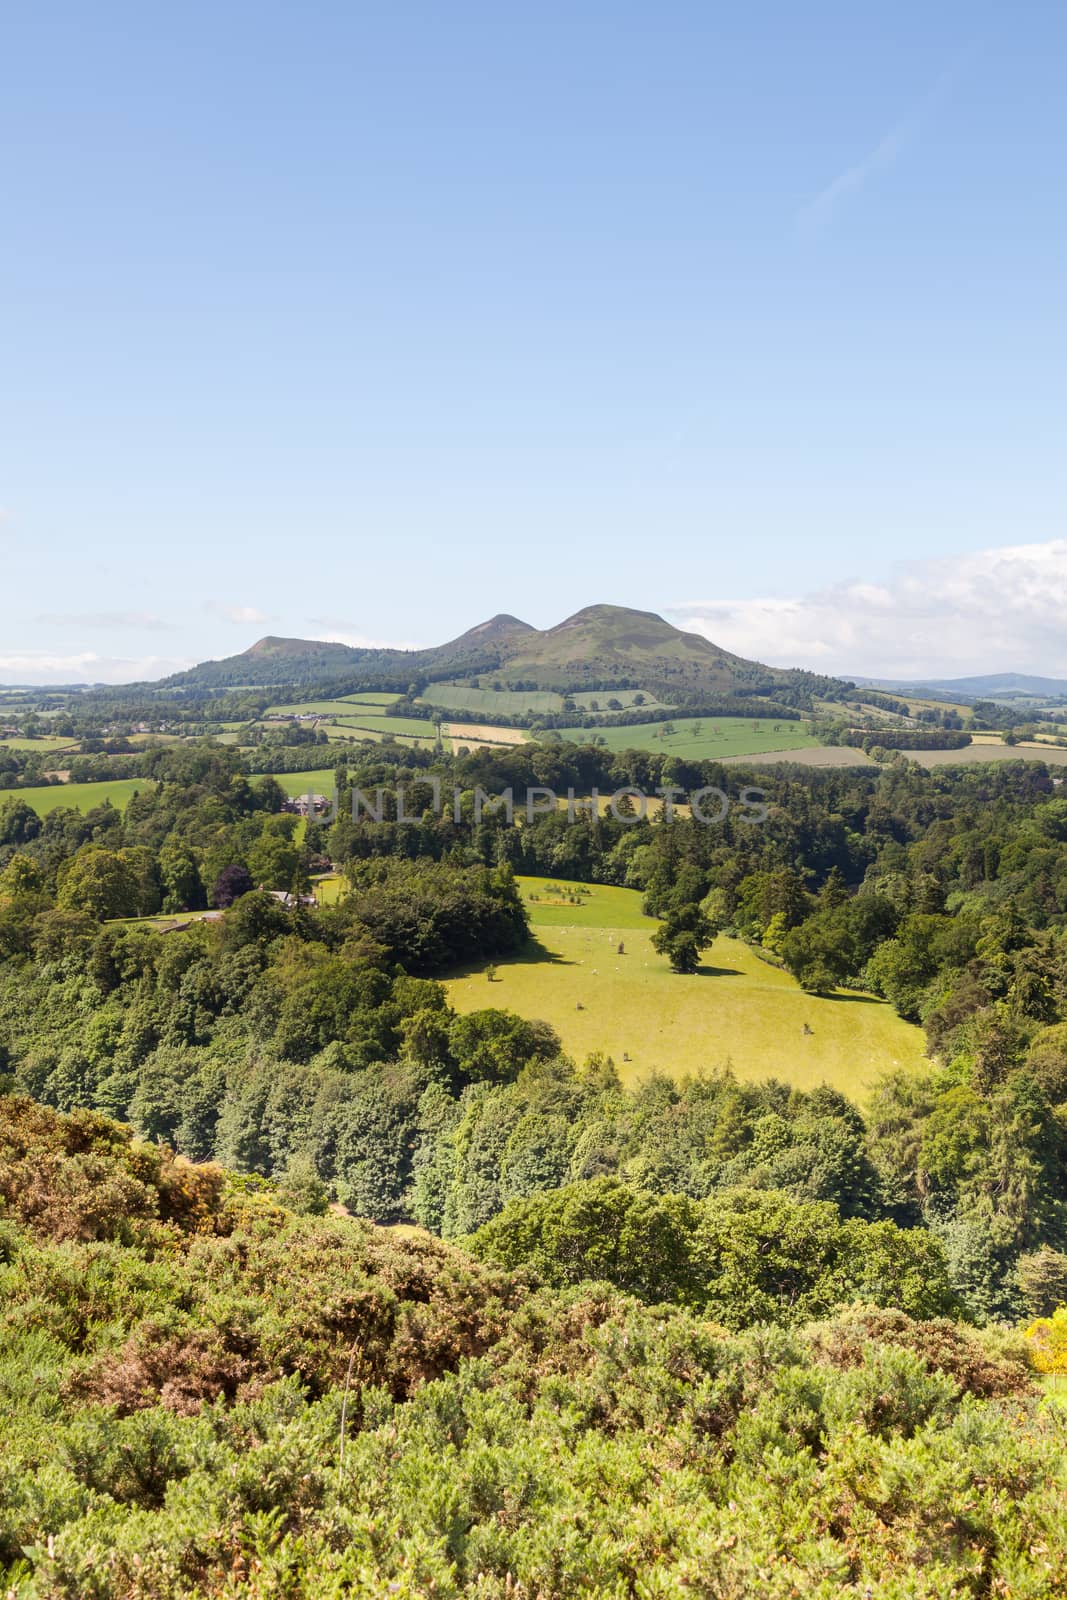 Scott's View is a scenic viewpoint overlooking the valley of the River Tweed in the Scottish Borders.